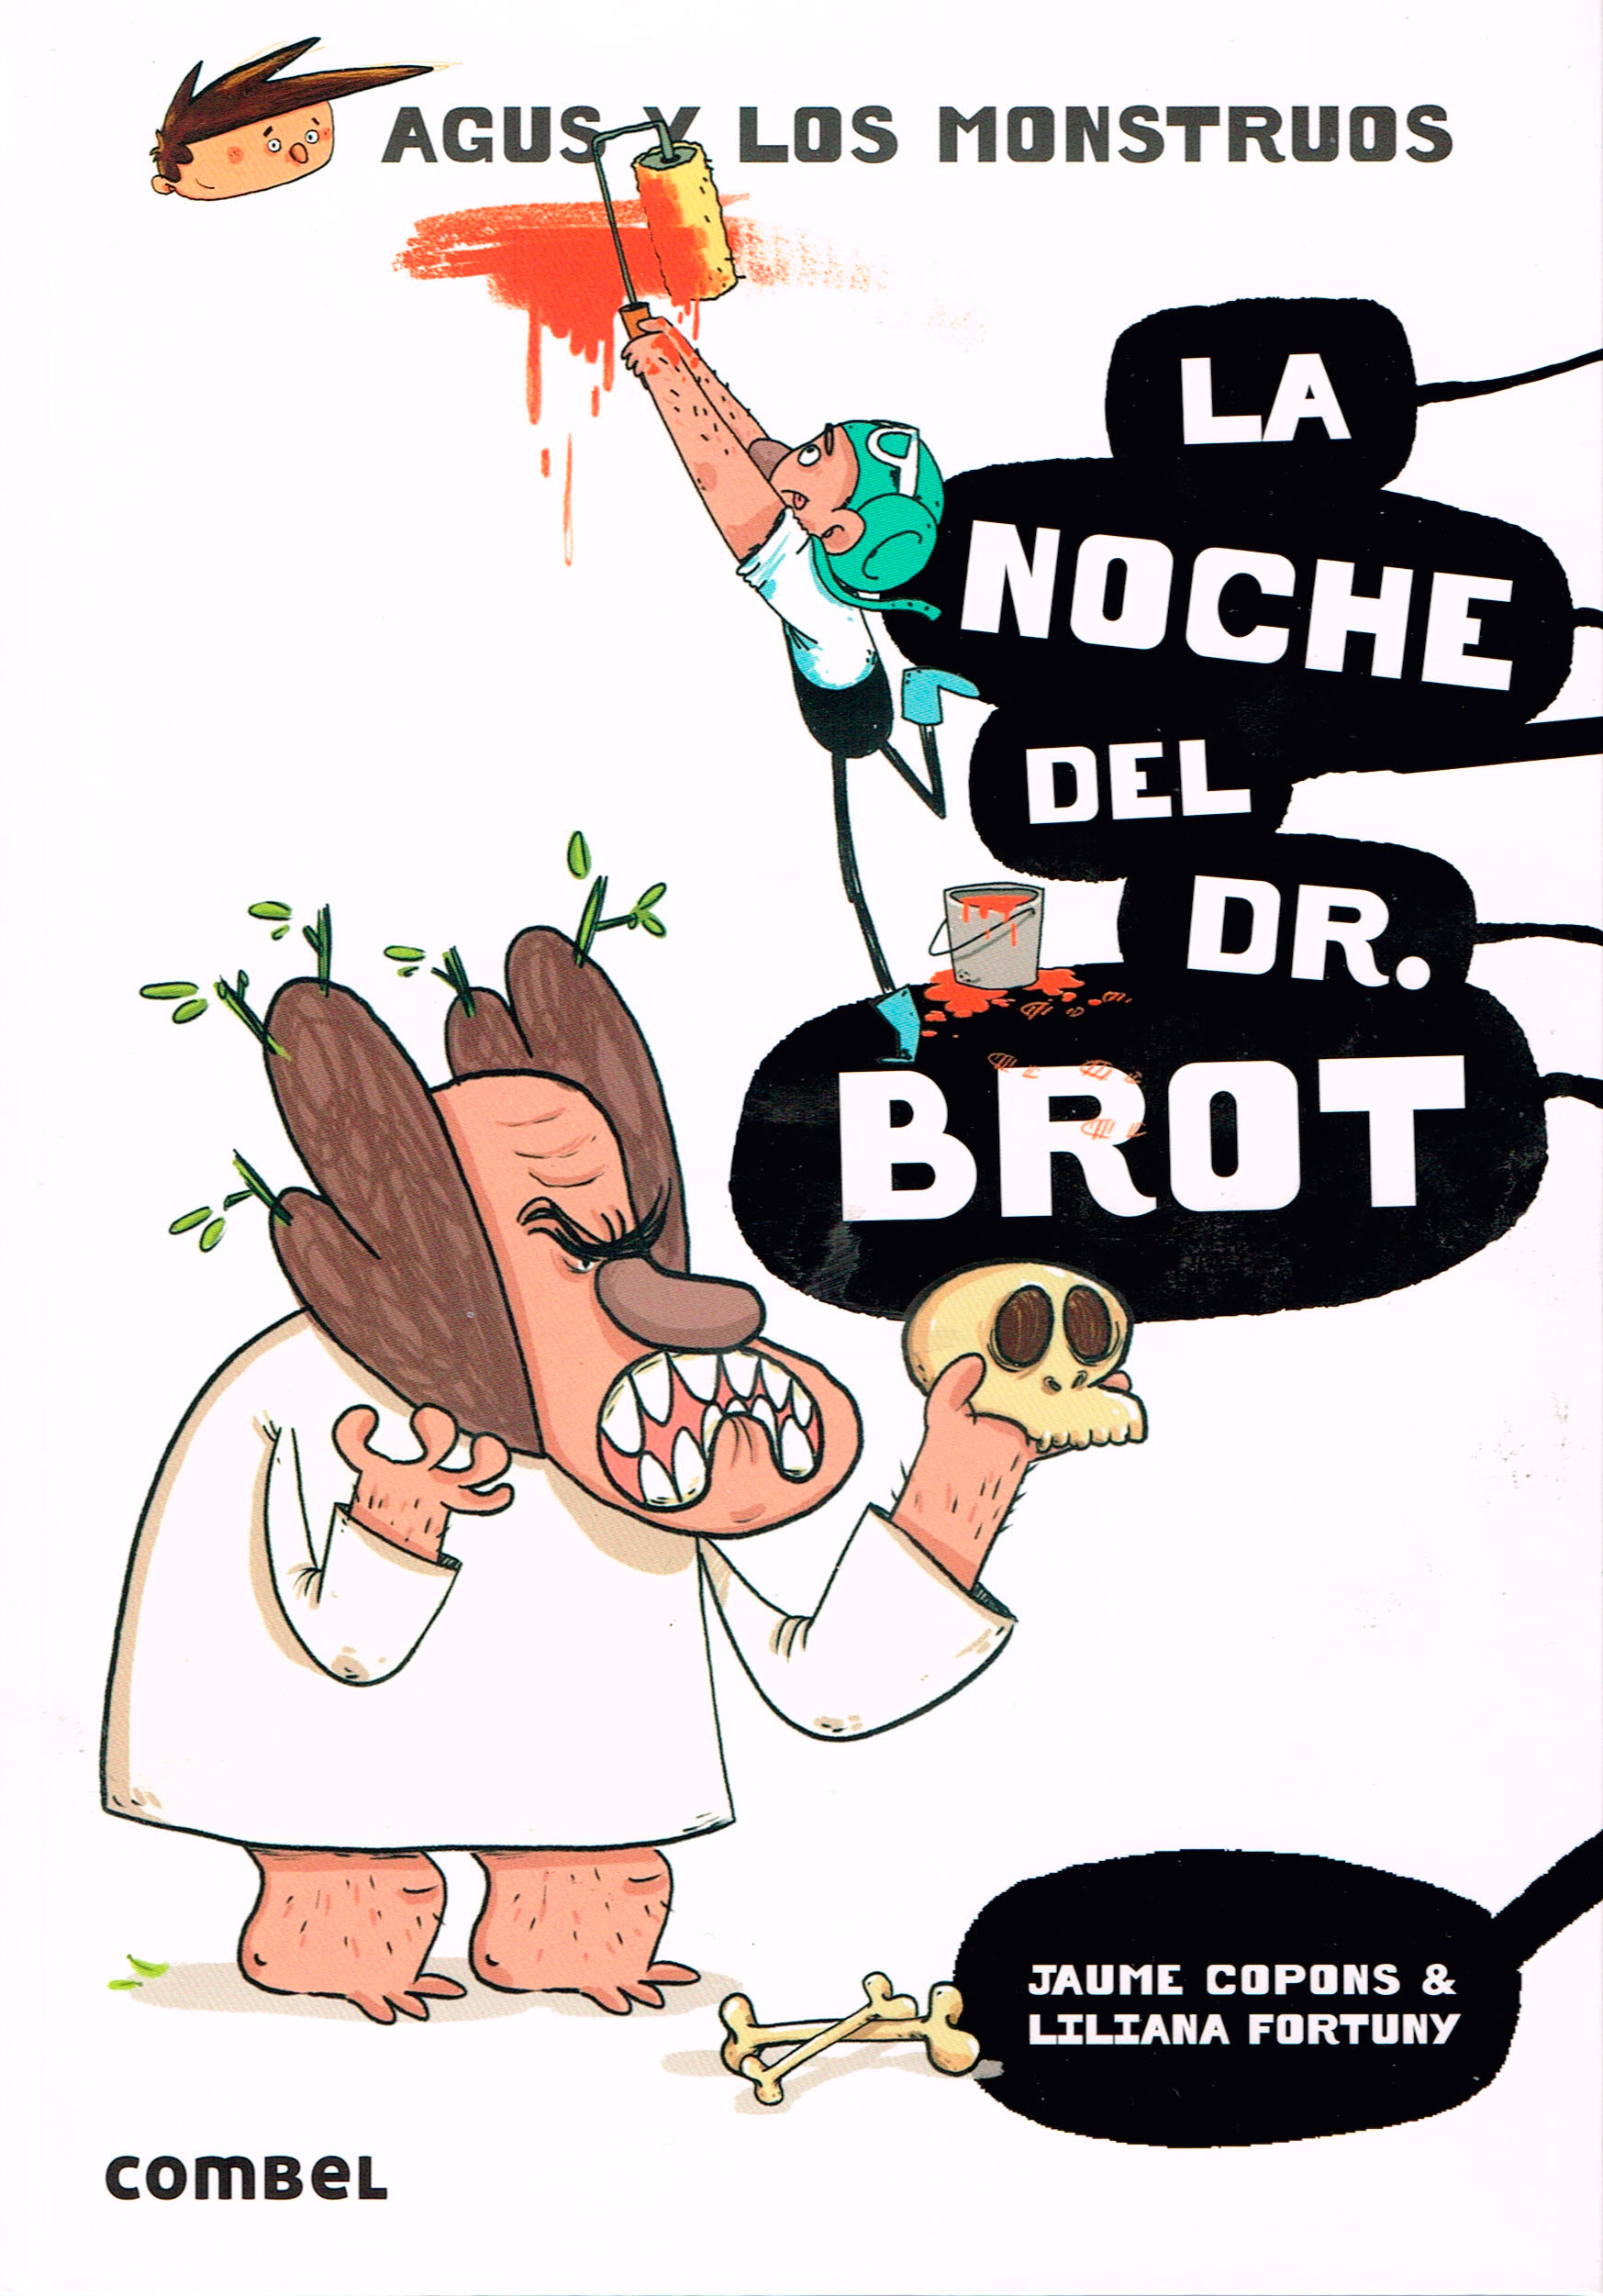 The night of Dr. Brot